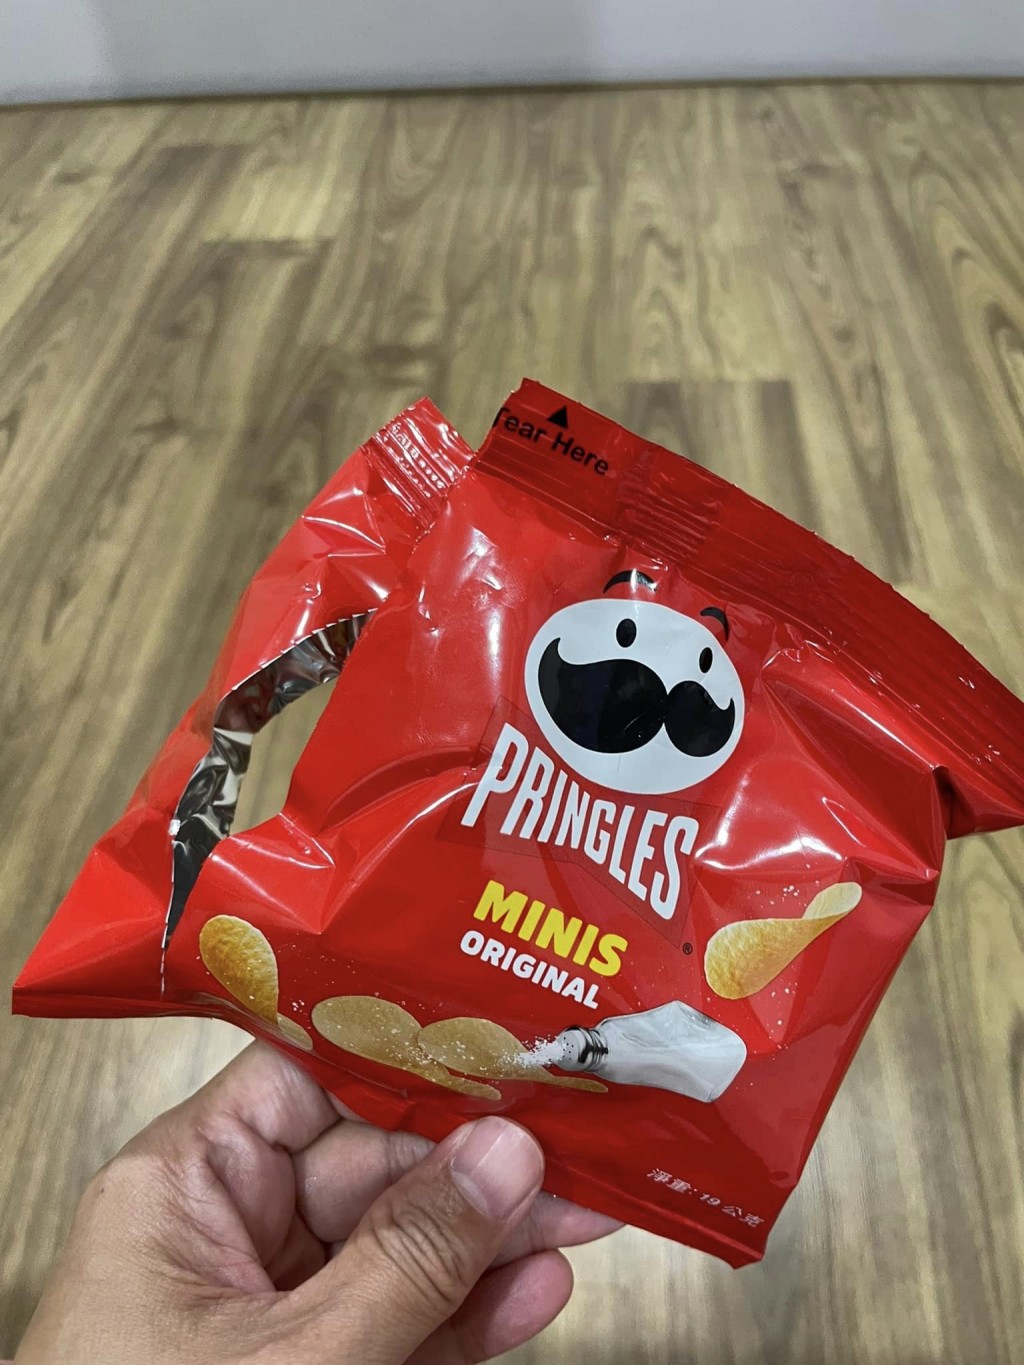 Costco Taiwan shopper finds only 2 chips in Pringles bag